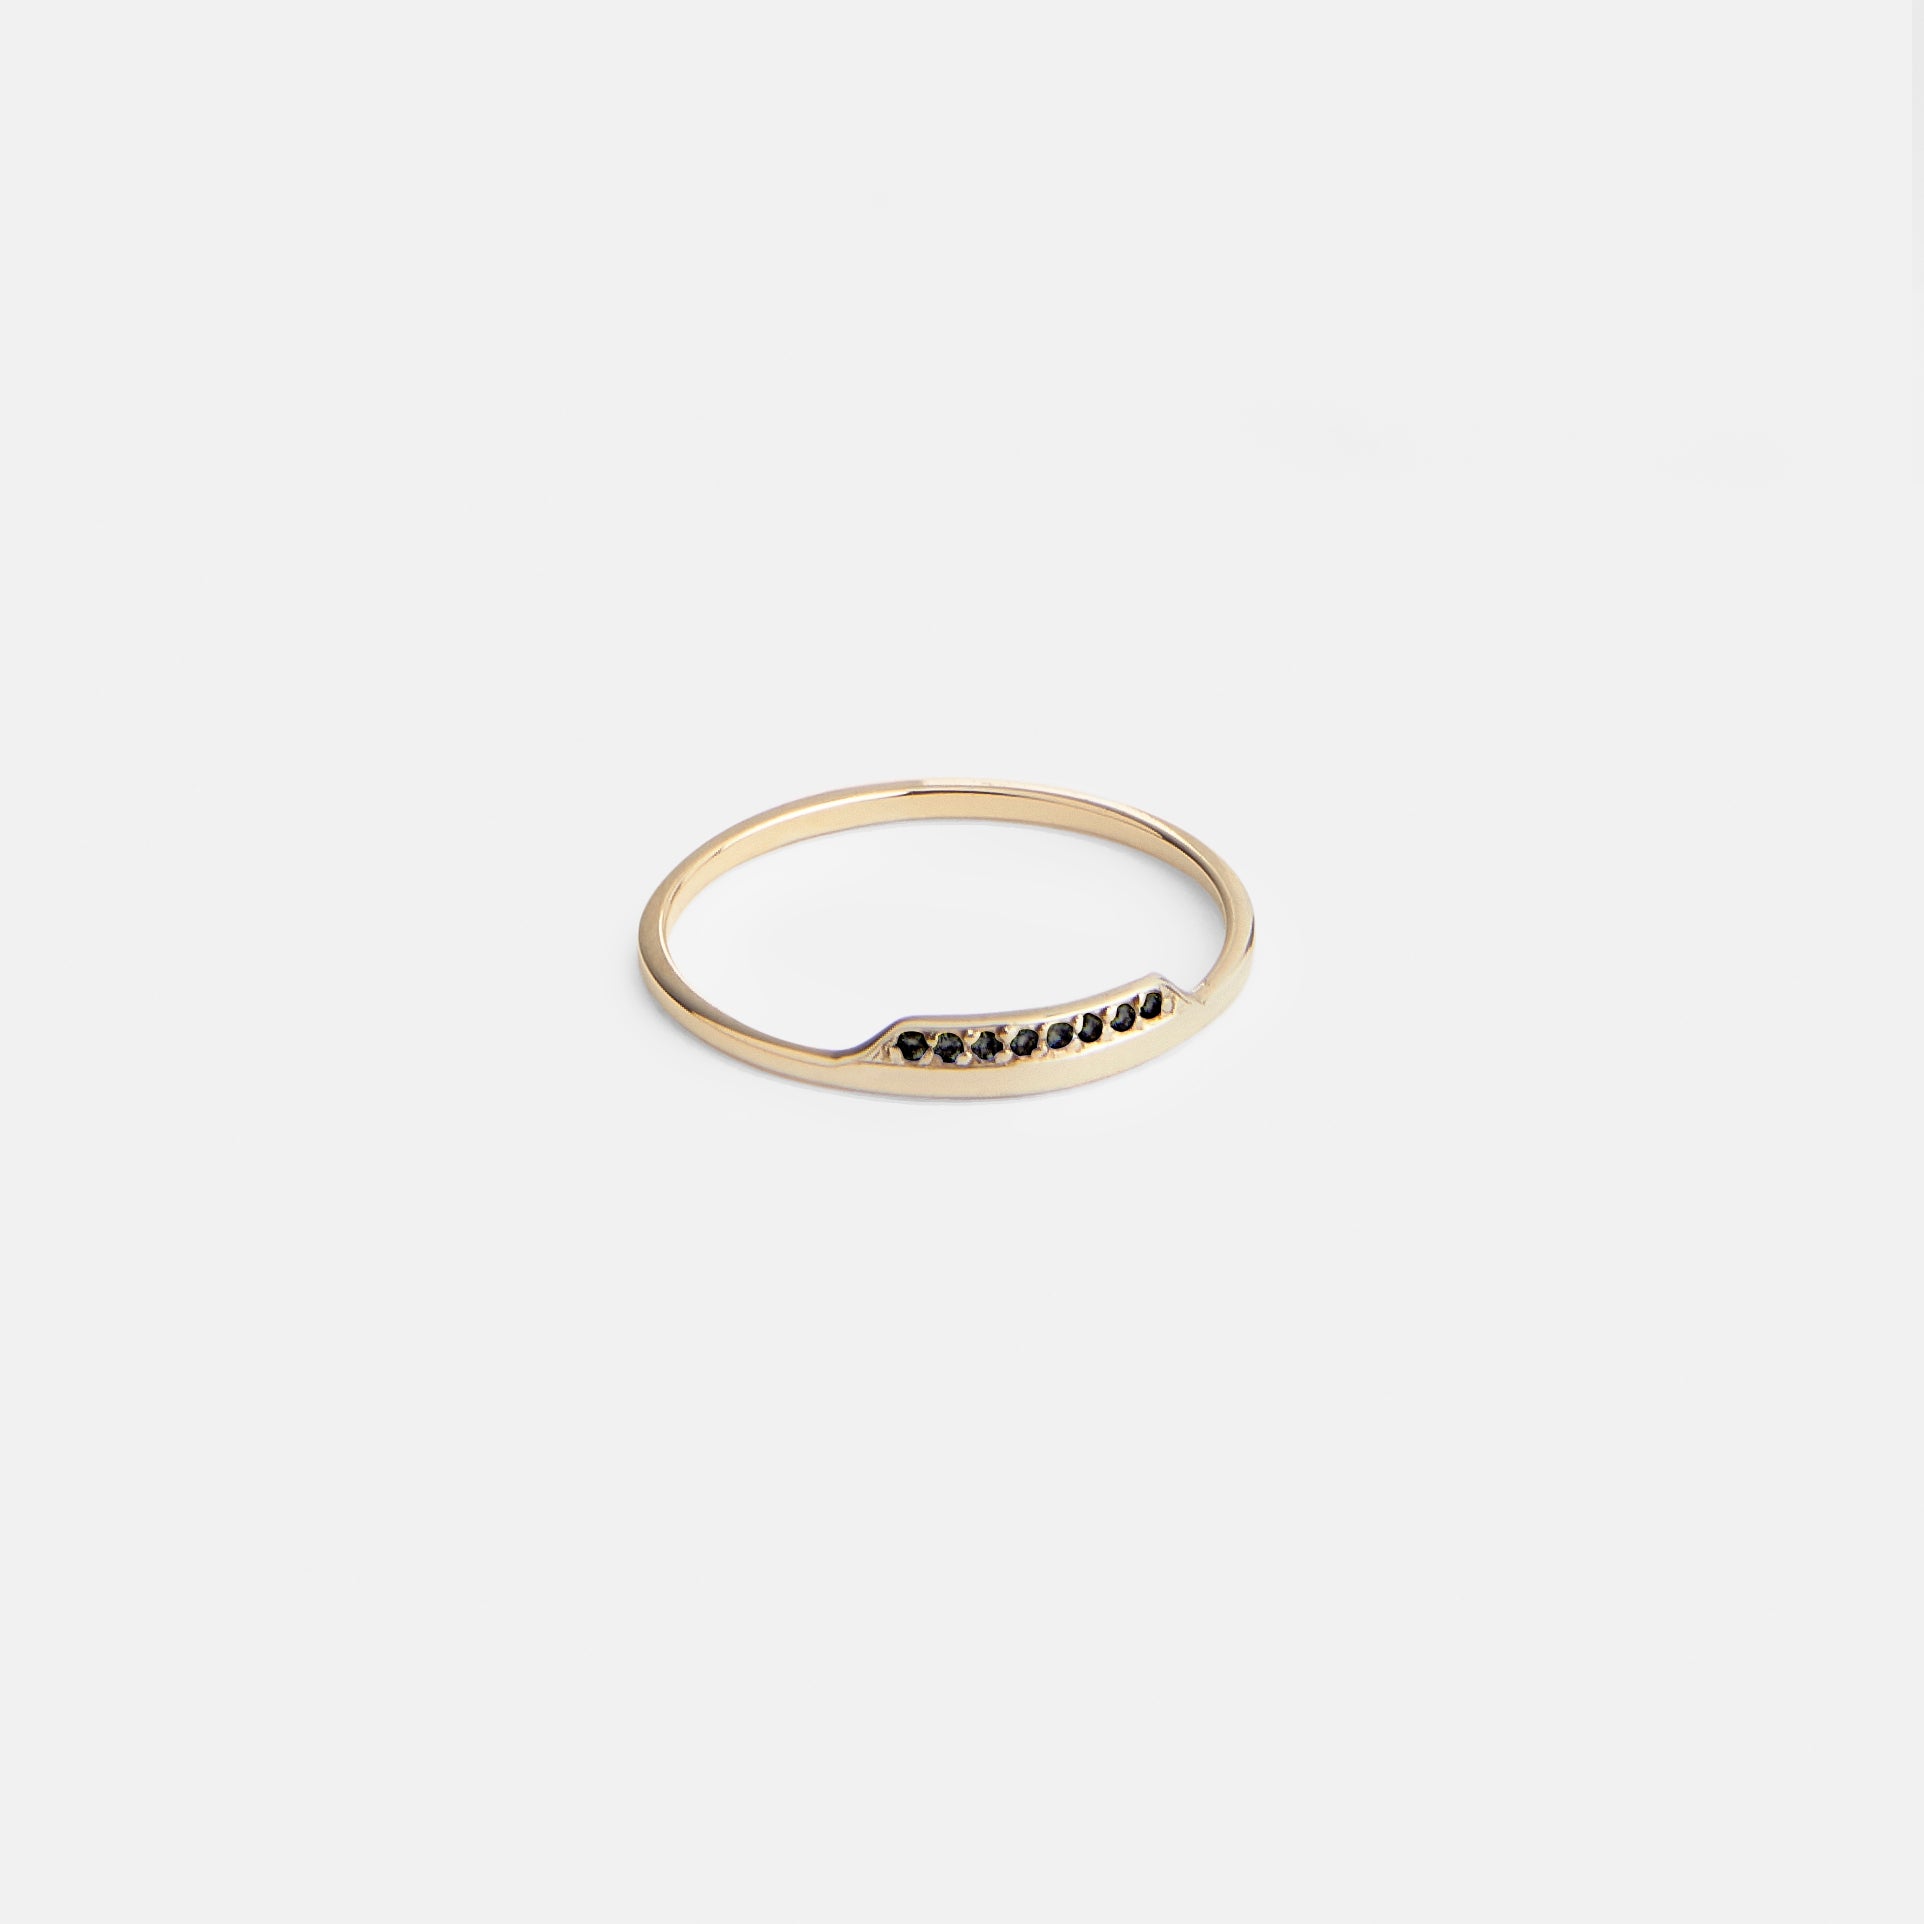 Salo Minimal Ring in 14k Gold set with Black Diamonds By SHW Fine Jewelry NYC